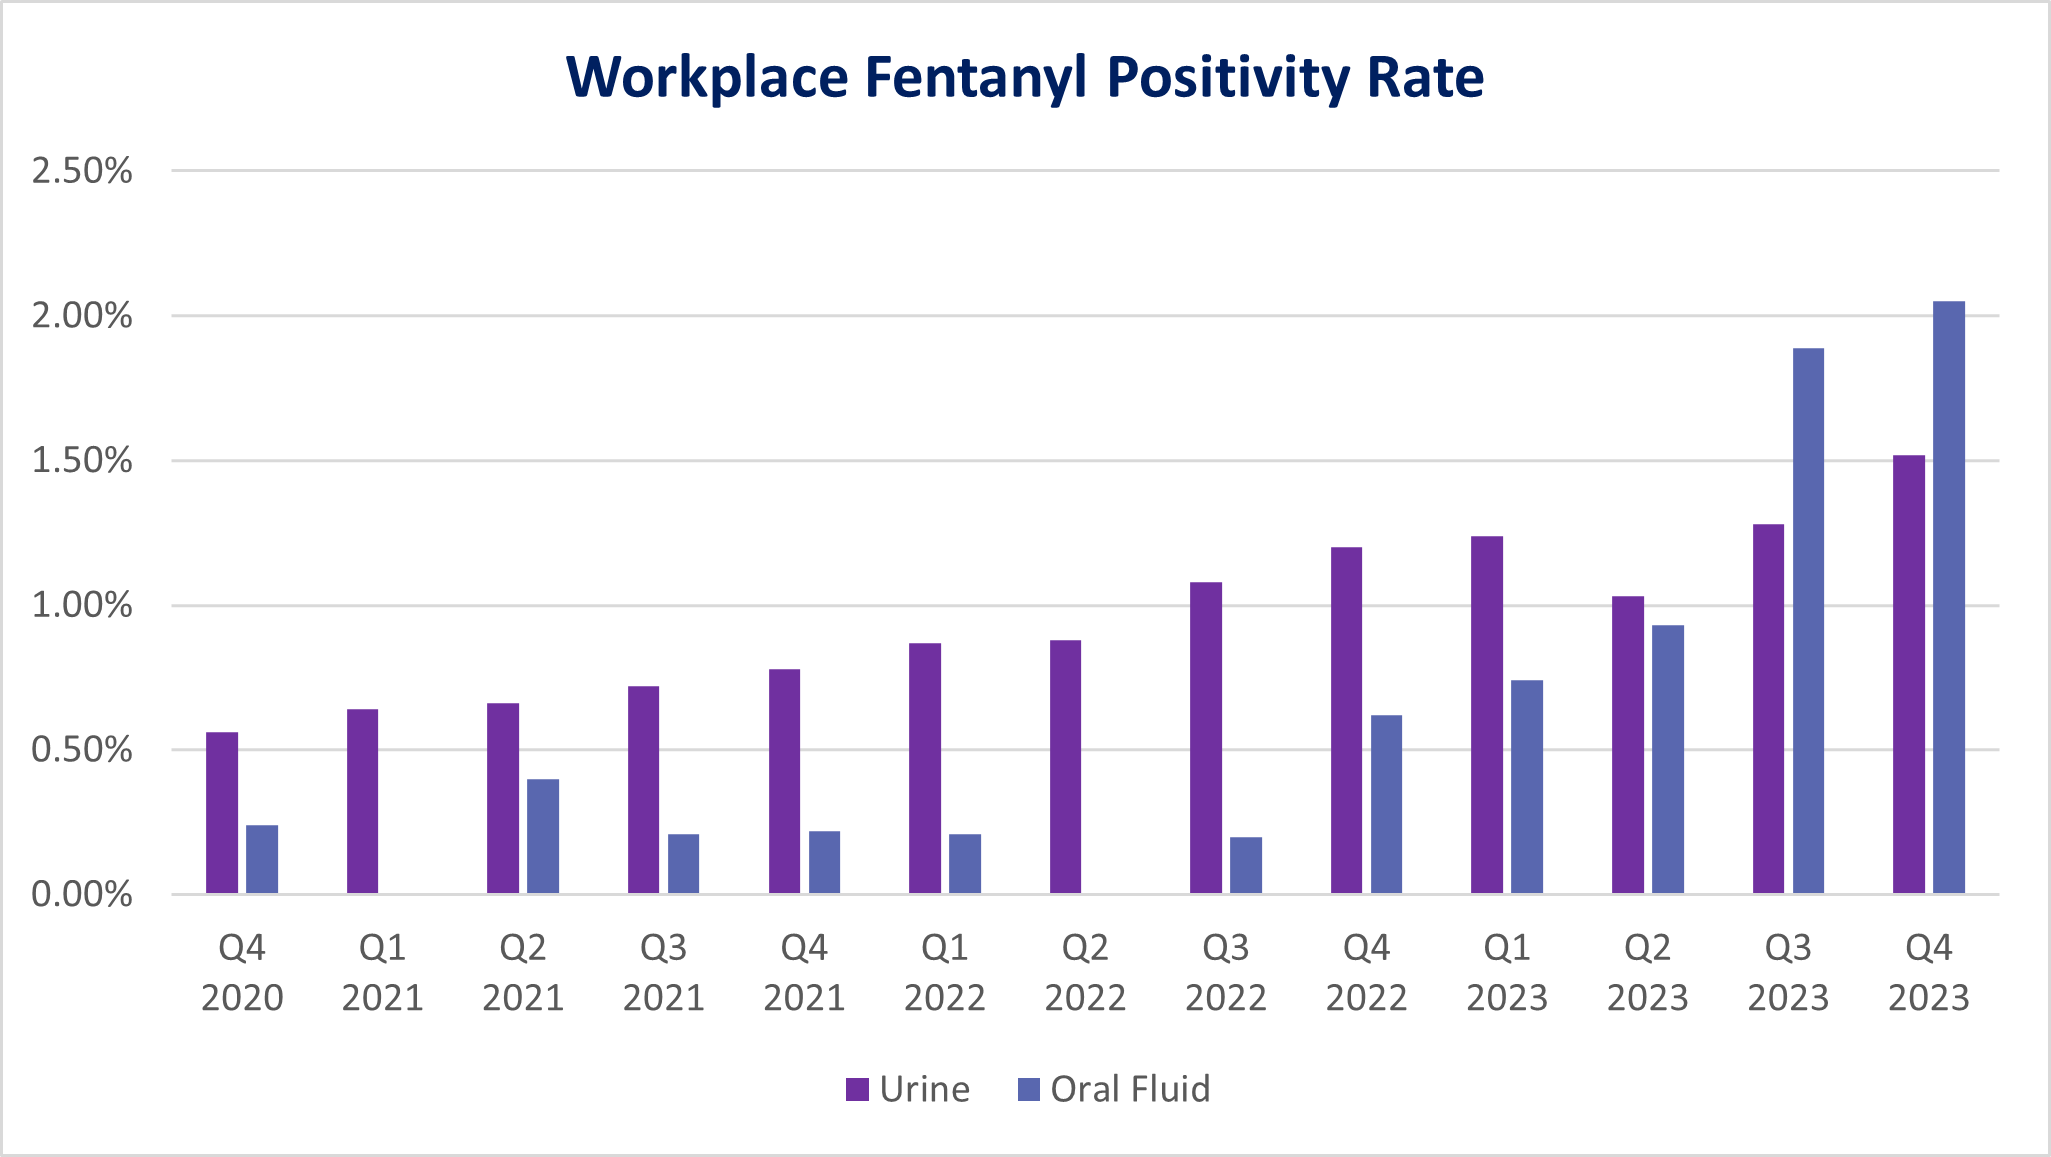 Workplace Fentanyl Positivity Rate